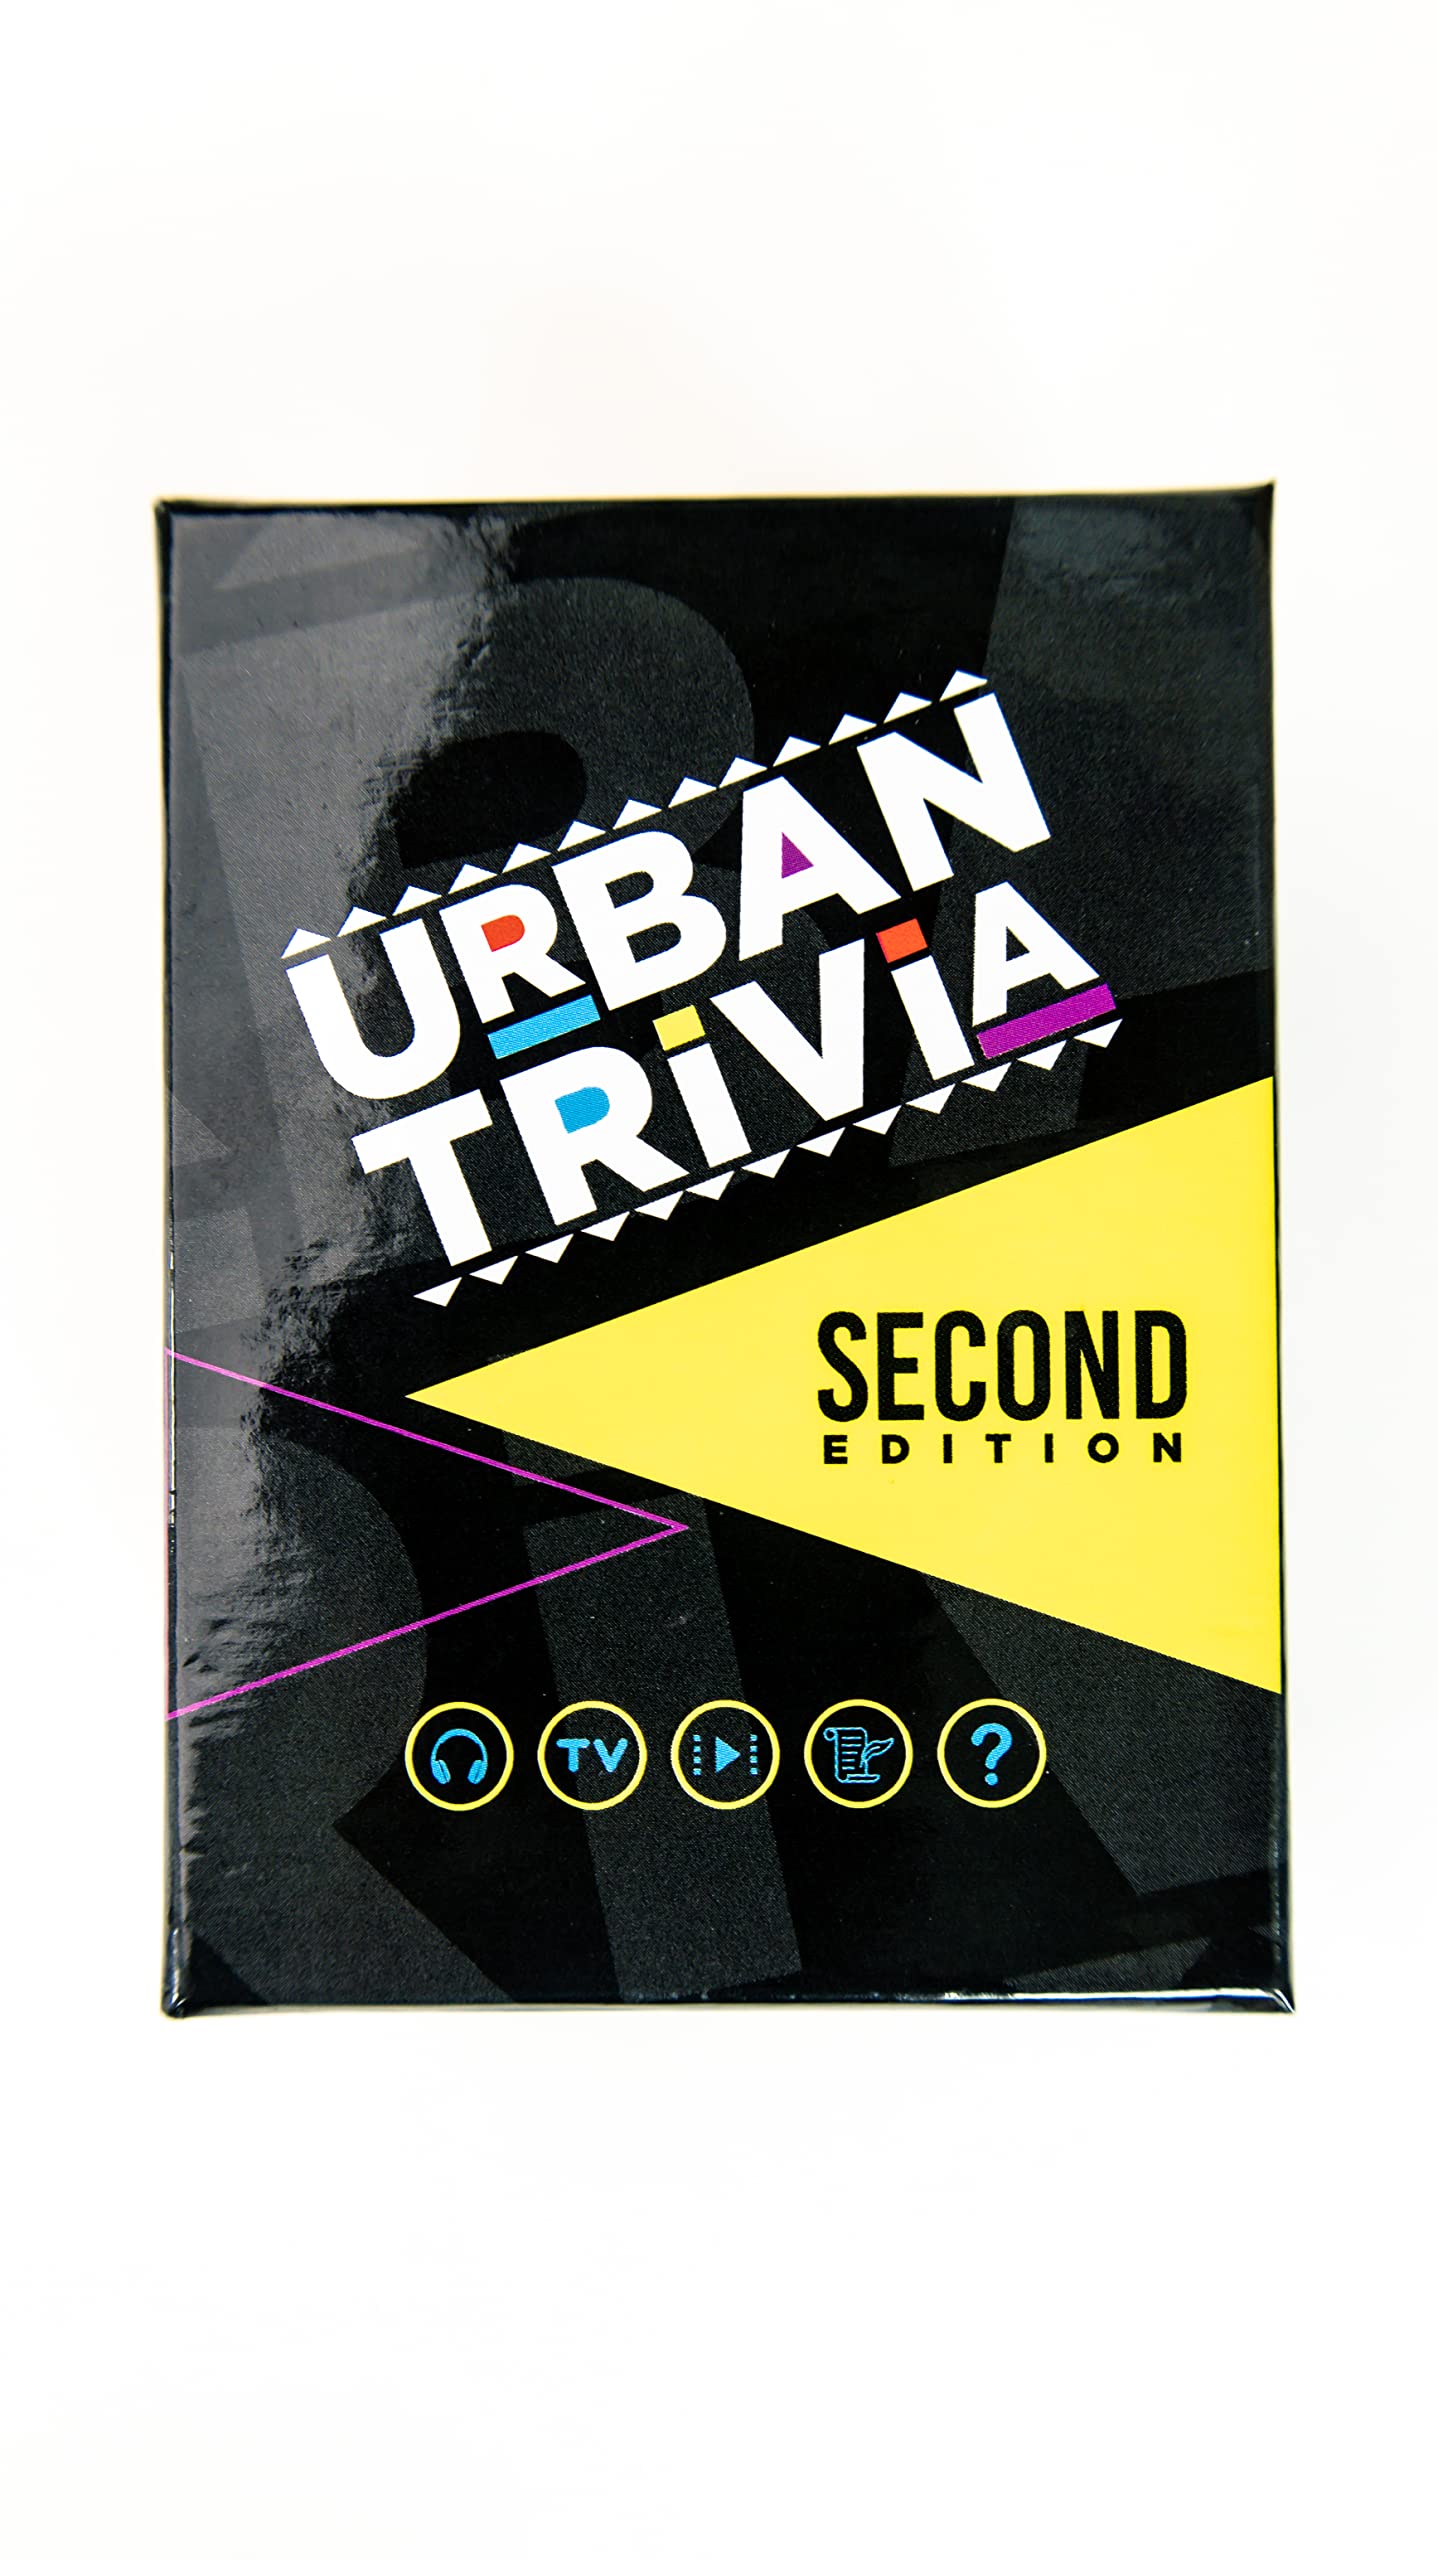 Urban Trivia Game 1st & 2nd Edition Bundle Party Pack. Double the Black Trivia Game Night Fun. Movies, Music, TV, Growing Up Black + More. Great Game Night Fun For Adults + Families. Black Party Game.